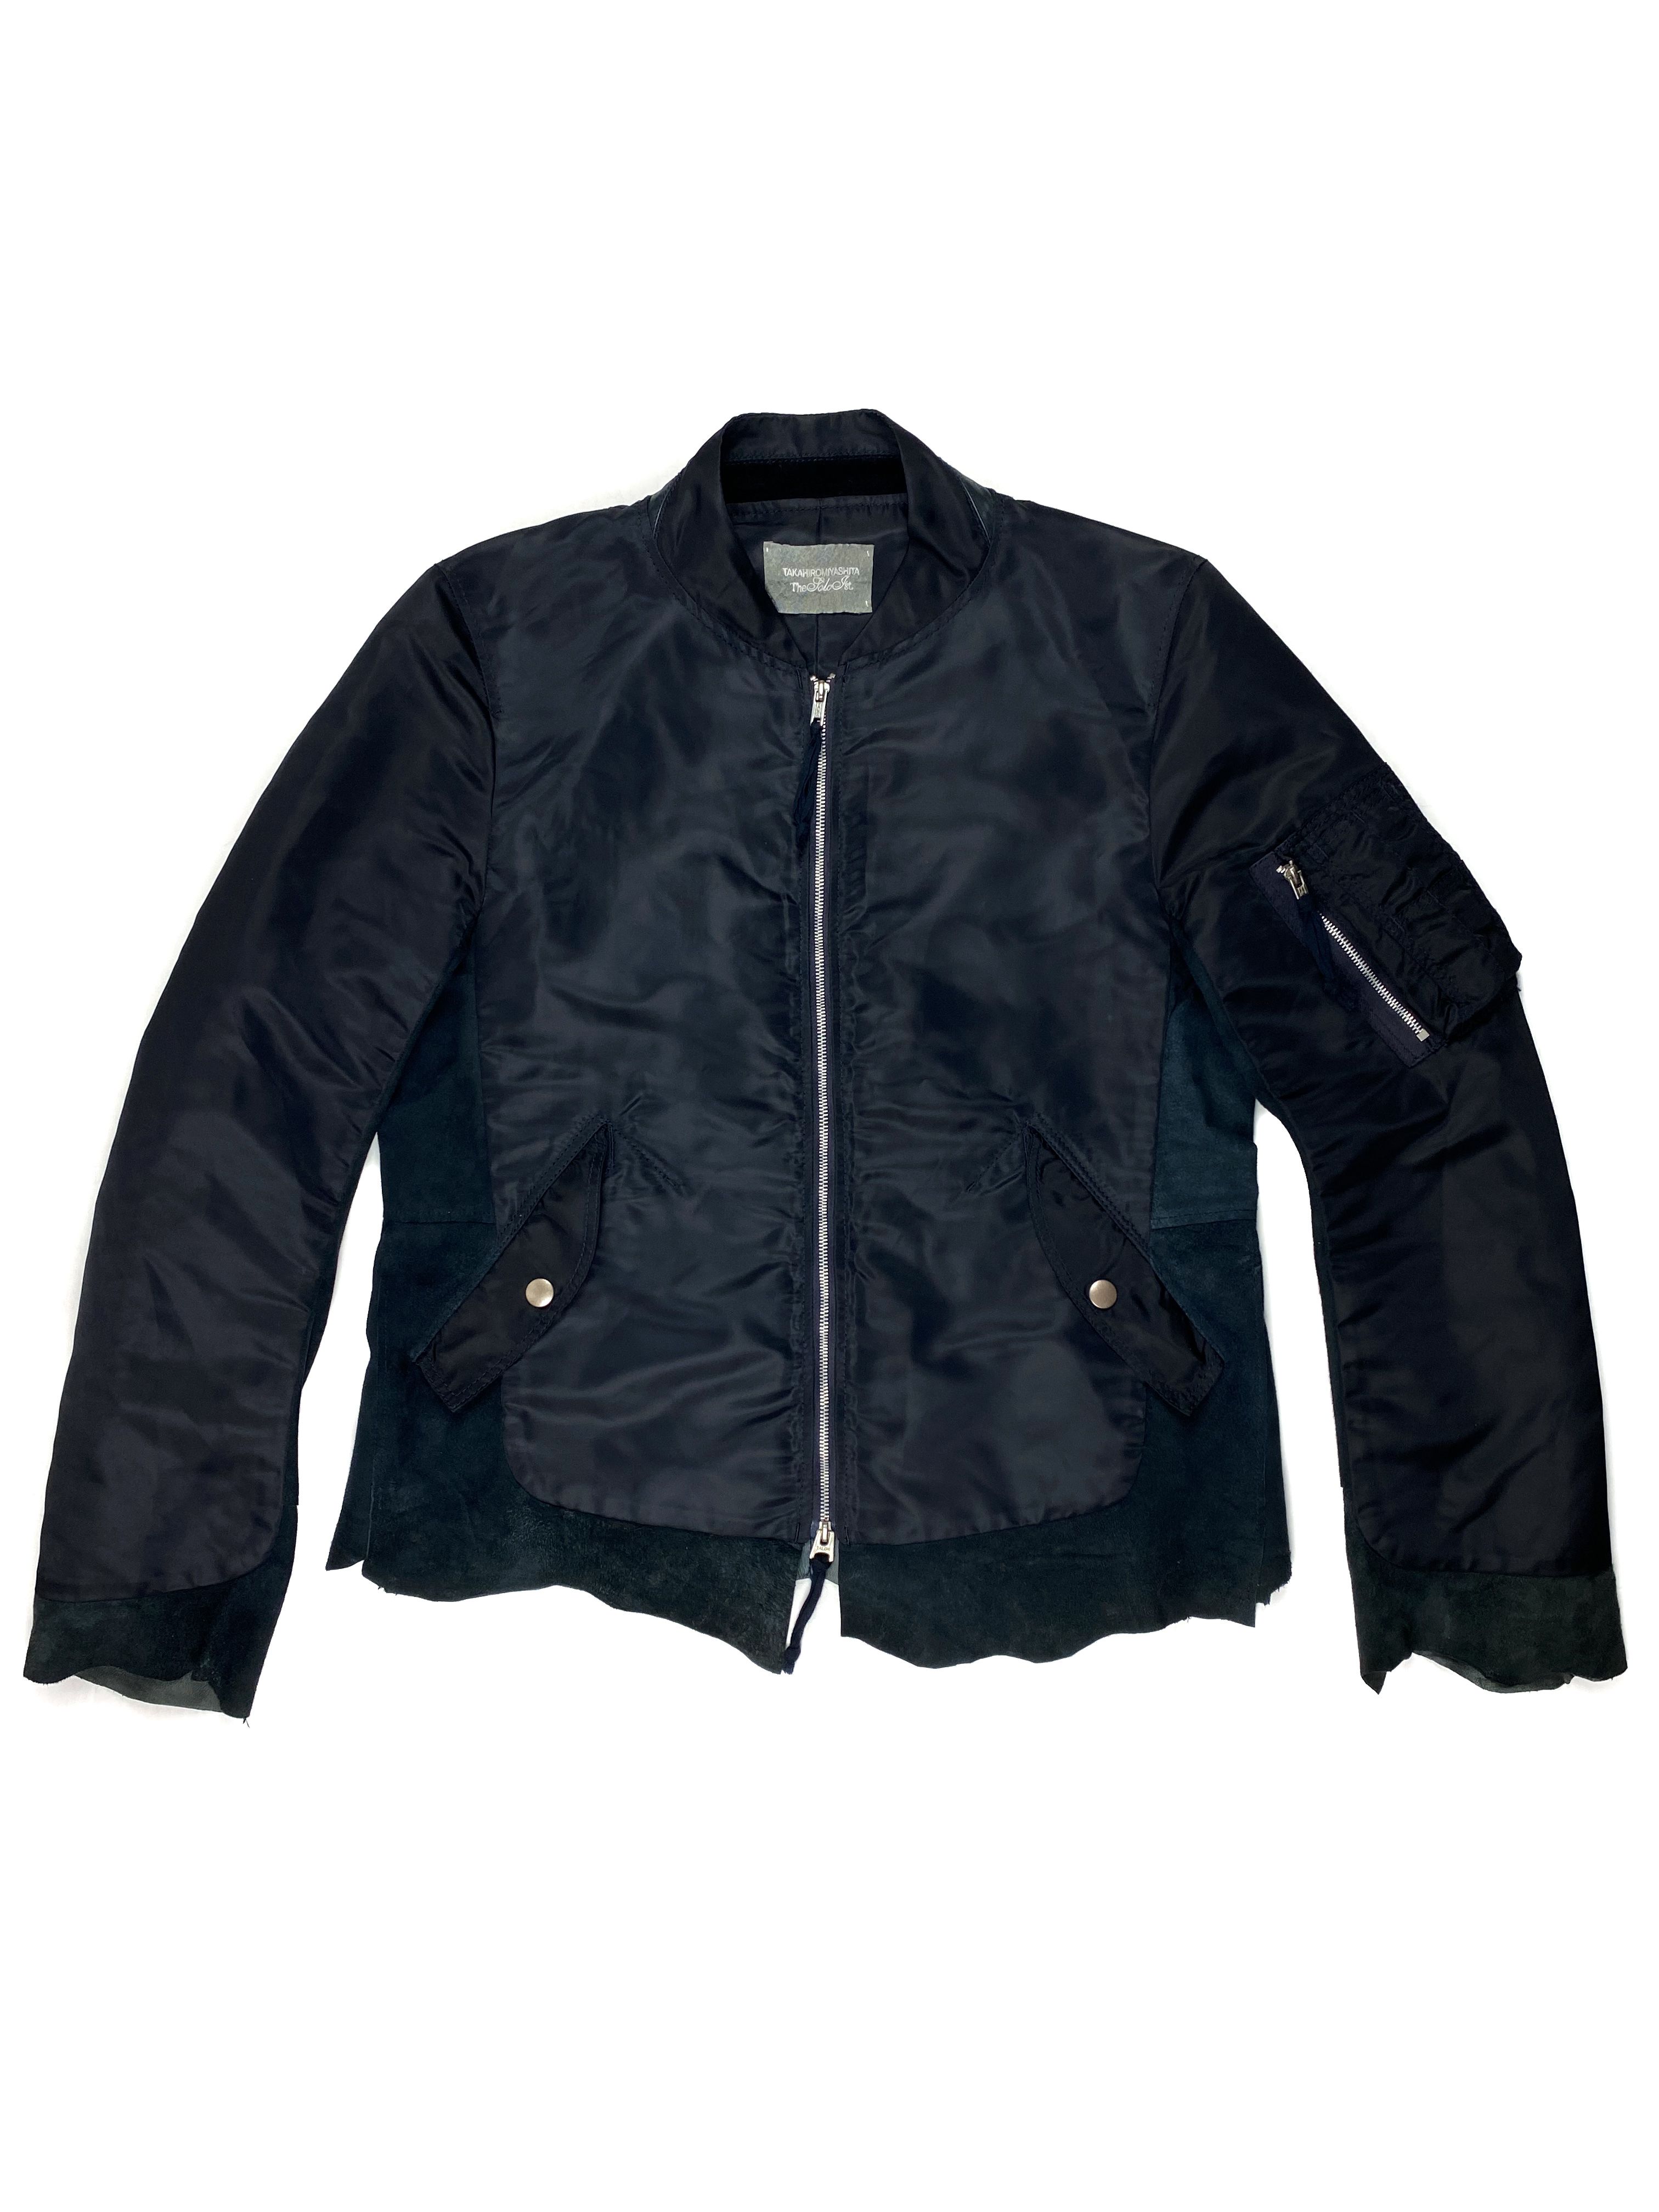 Pre-owned Takahiromiyashita The Soloist Sheep Leather And Silk Ma-1 Bomber Jacket In Black